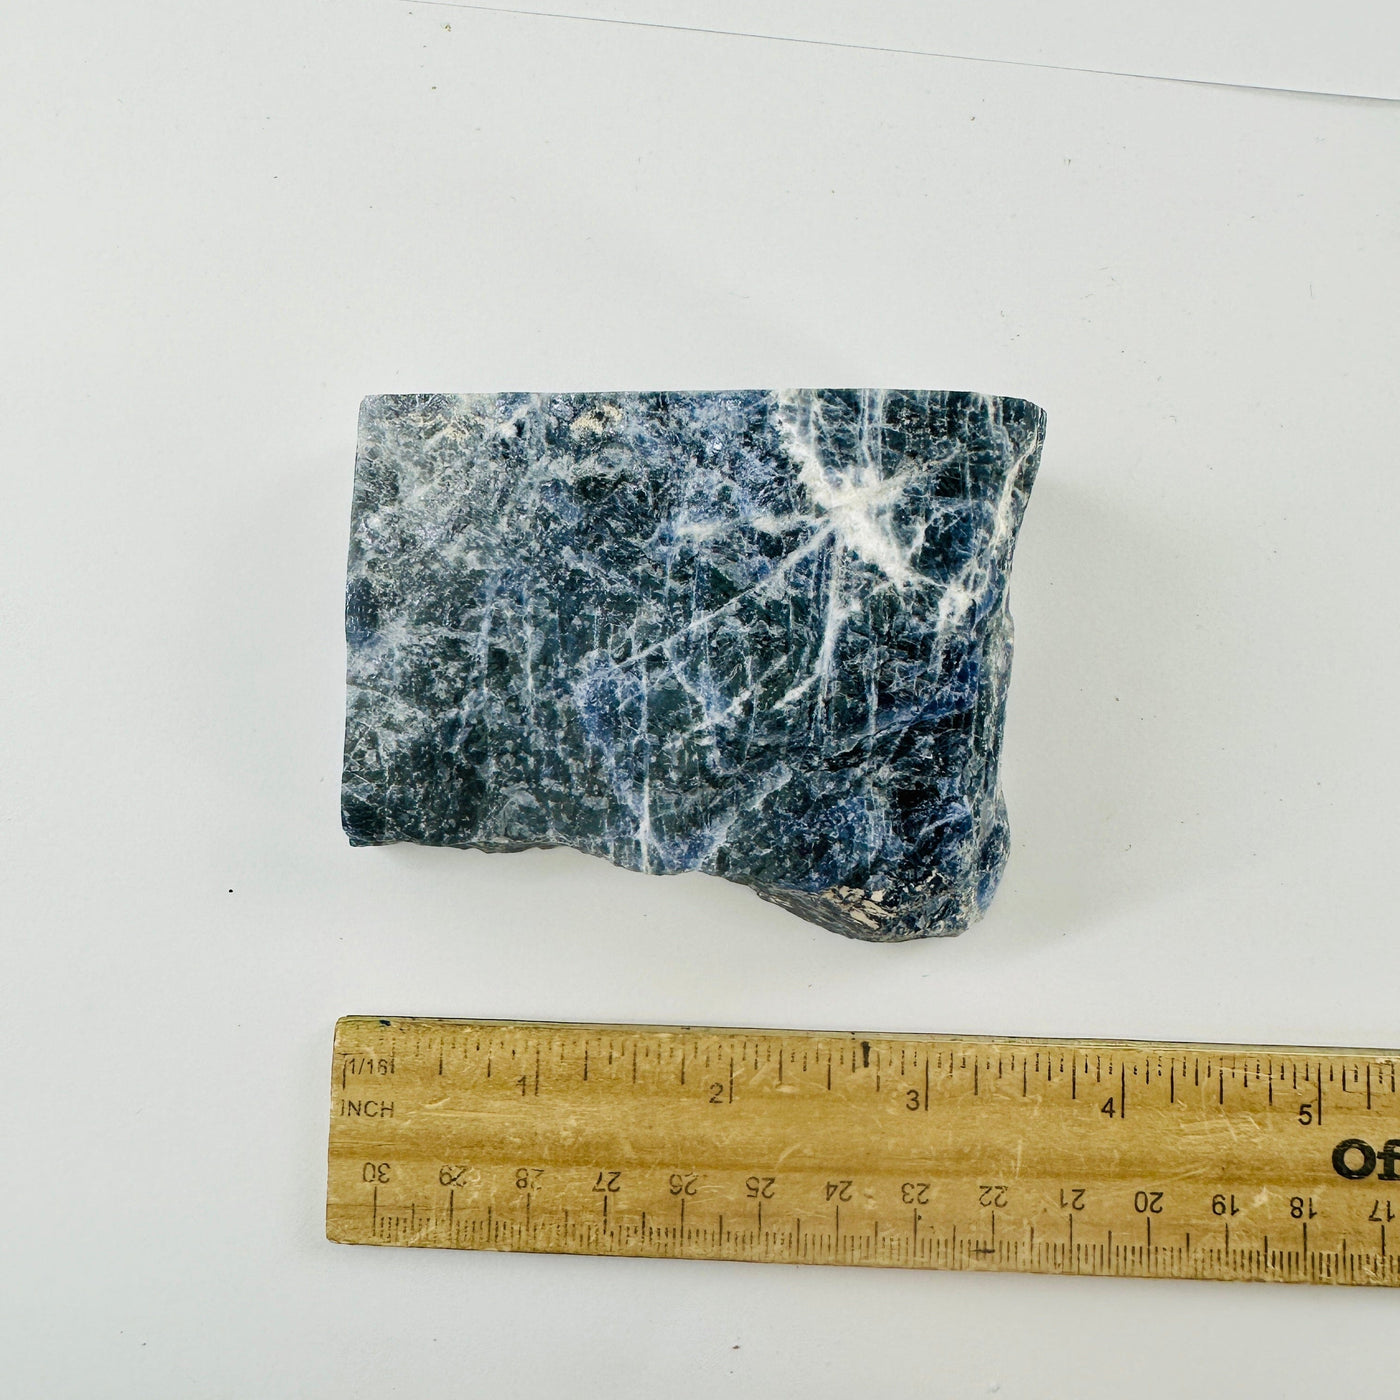  Sodalite Chunk - Rough Crystal top view with ruler for size reference